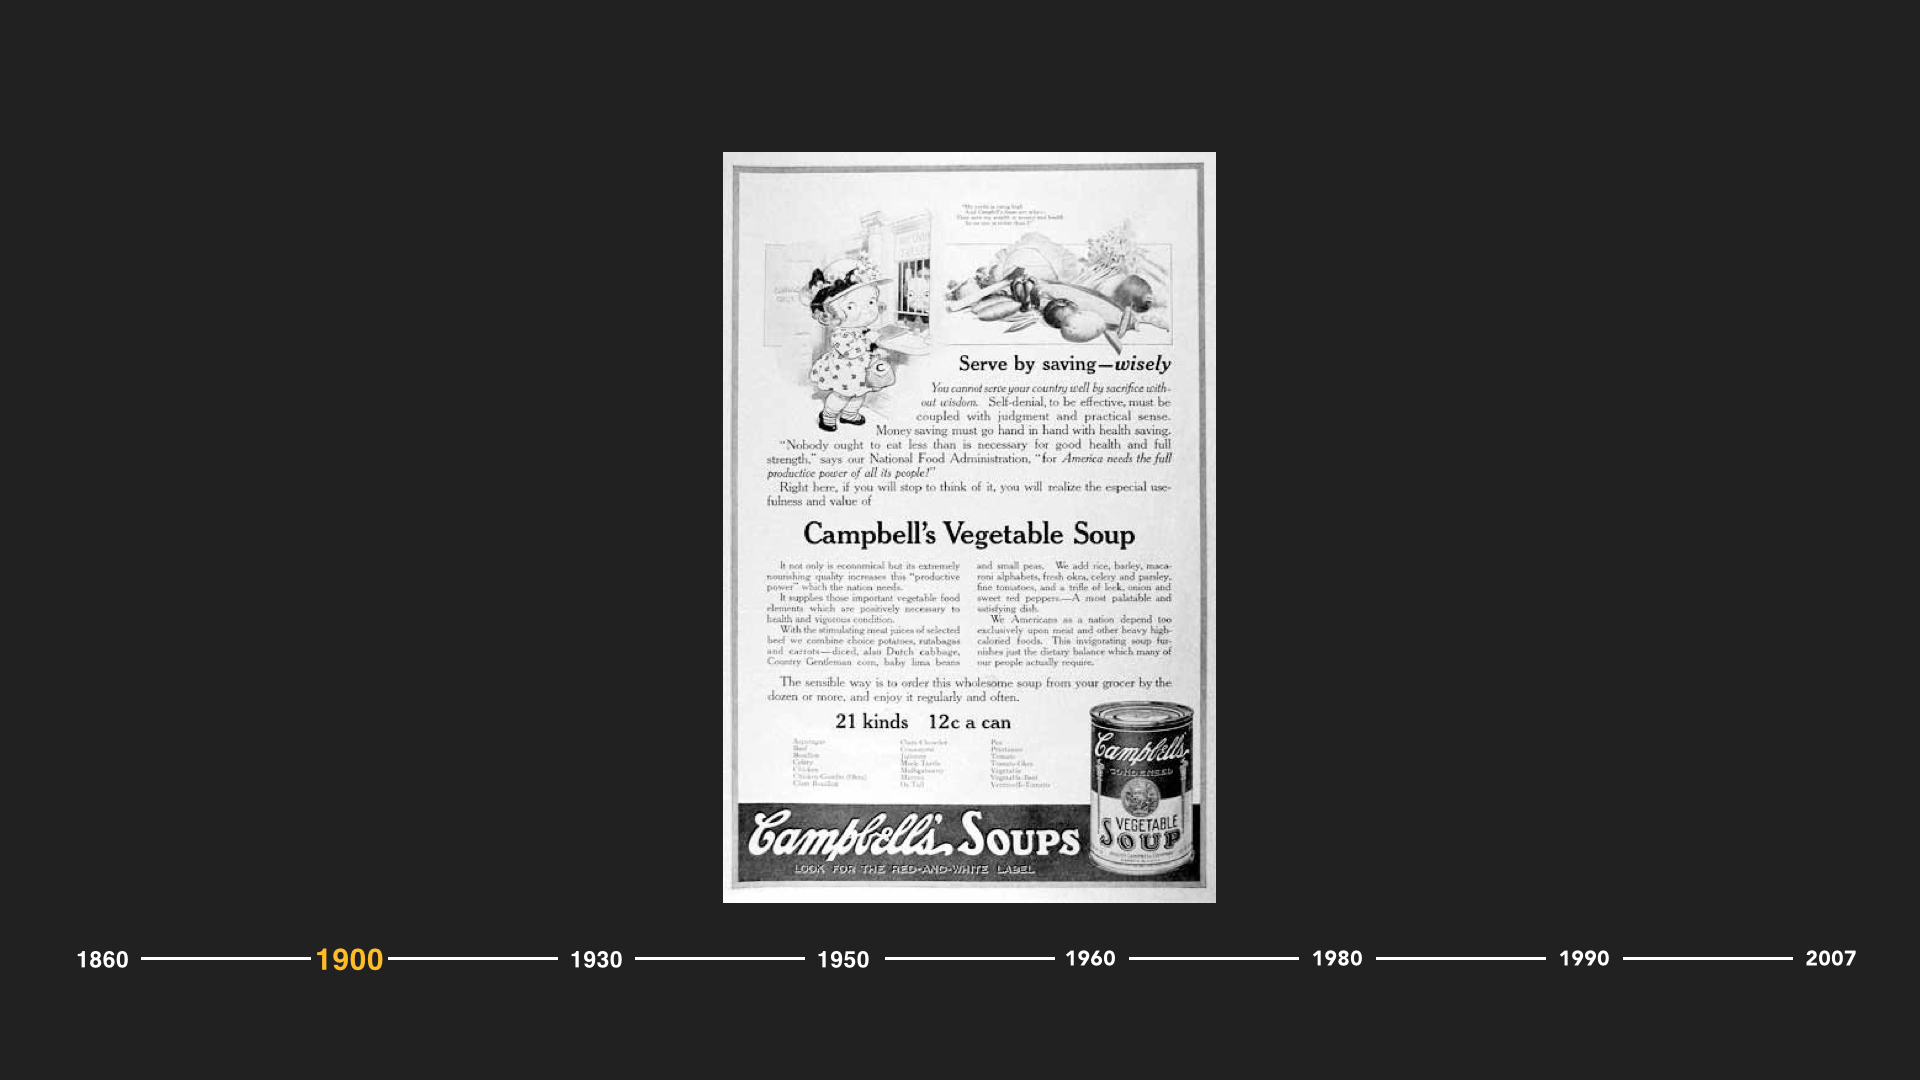  And with the growing desire for more healthy food solutions, Campbell's was born. Due to the immense demand from the World War I soldiers for a nutritious soup, Campbell’s introduced what would become an American staple, their Vegetable Beef soup.  